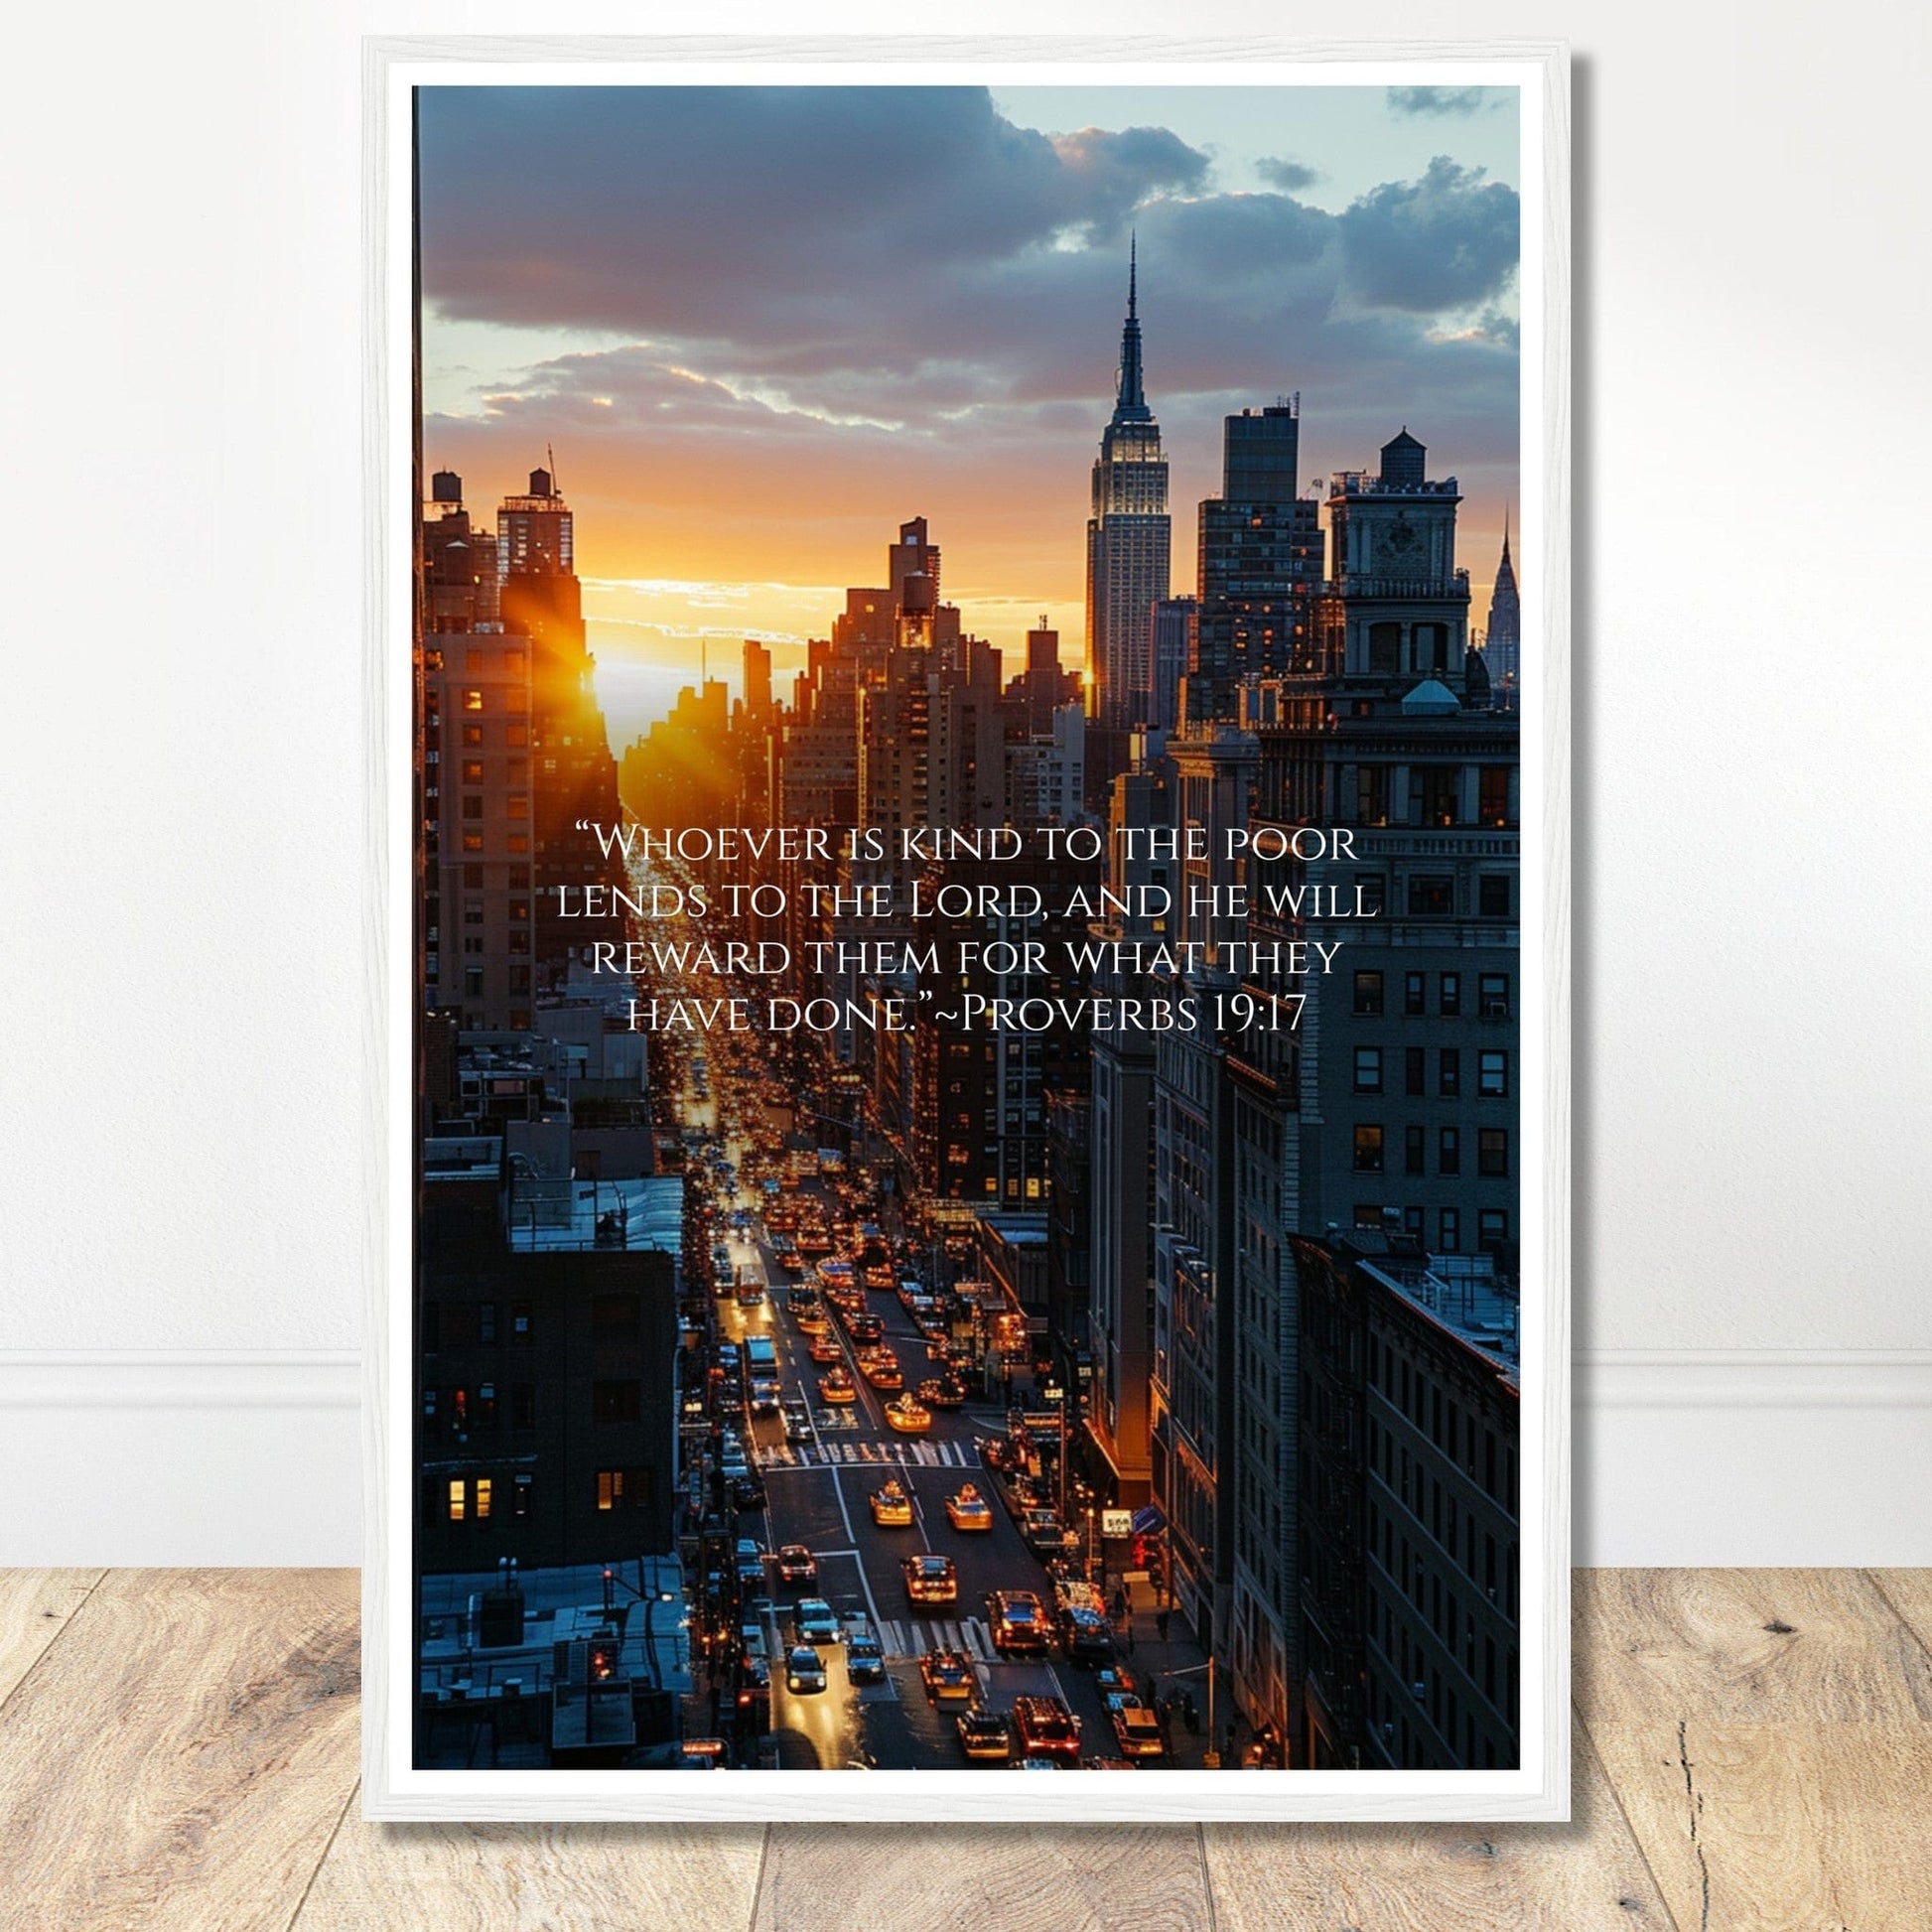 Coffee With My Father Print Material 60x90 cm / 24x36″ / Premium Matte Paper Wooden Framed Poster / White frame Framed Template